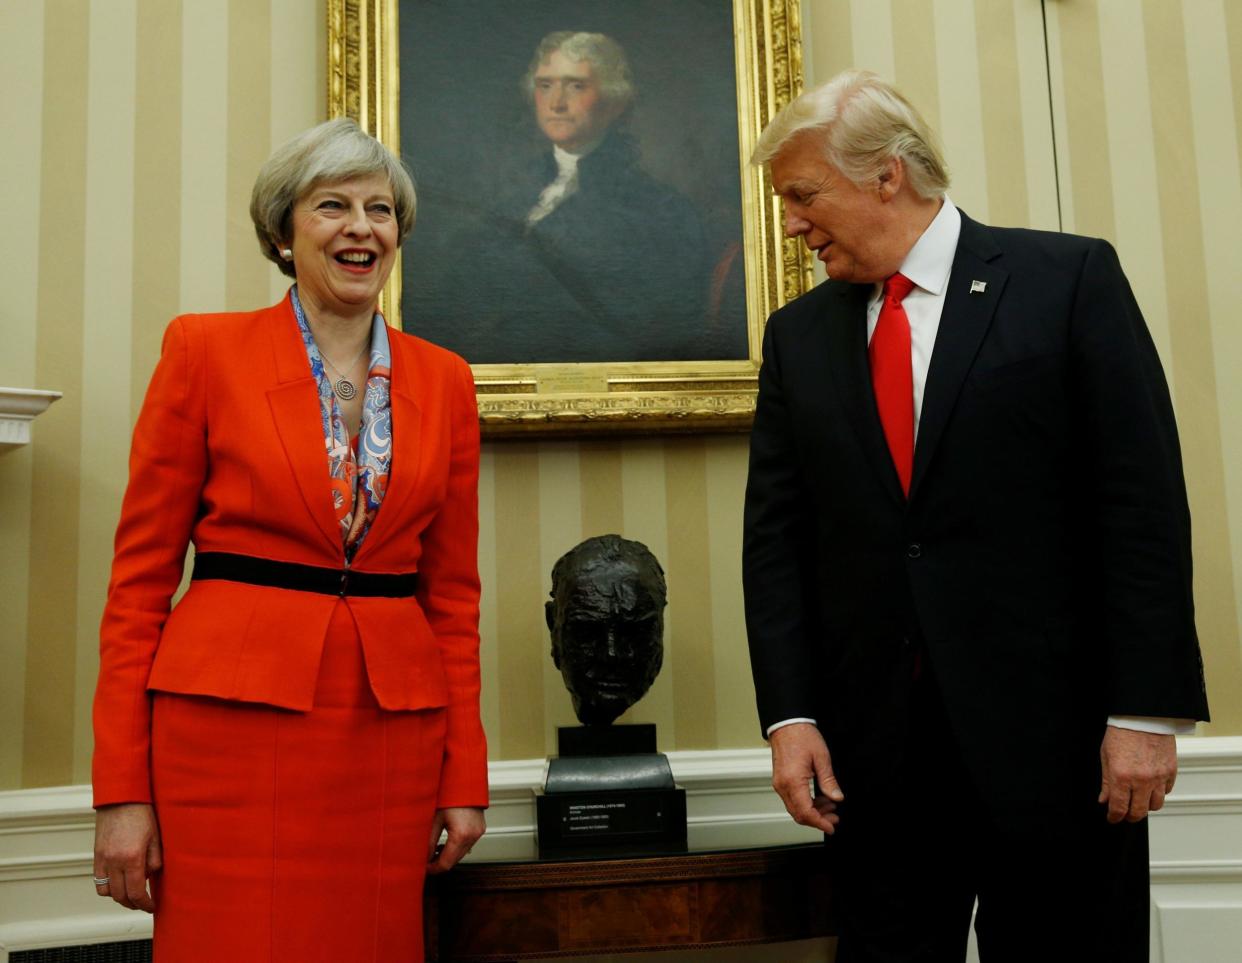 President Trump looks at Churchill bust while meeting with British Prime Minister May at the White House earlier this year: Reuters